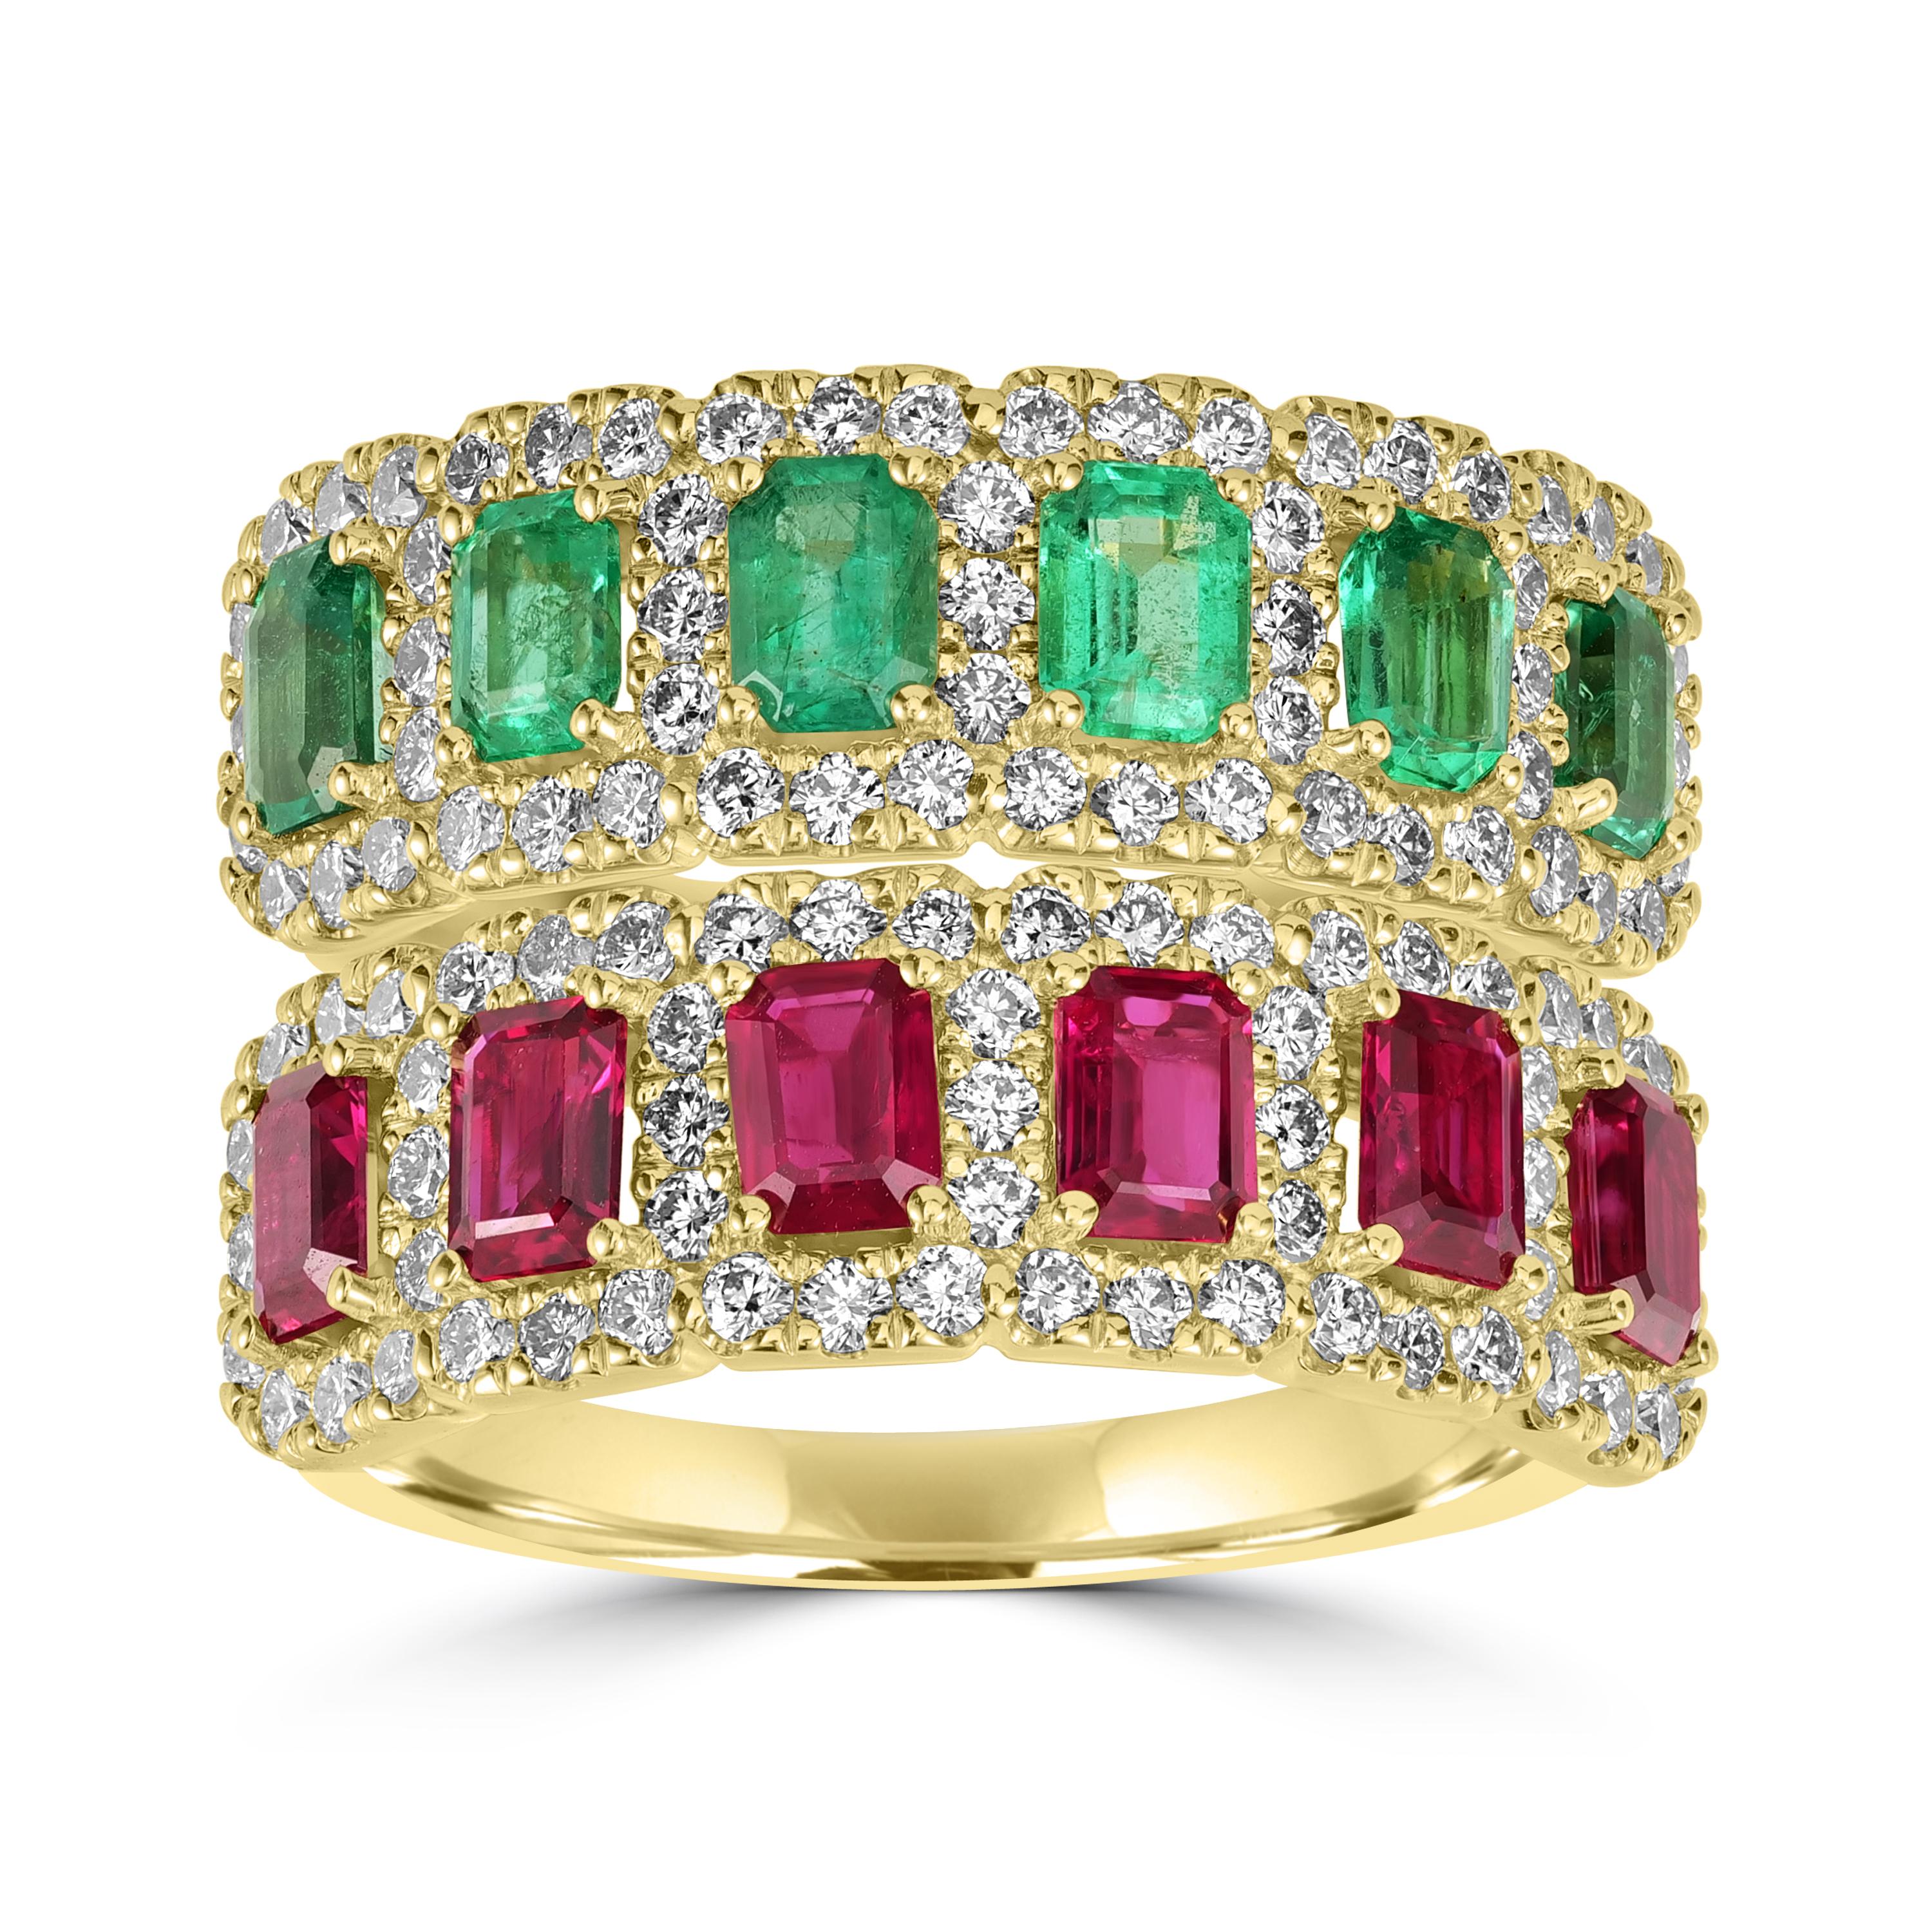 Modern 1.53 Carats Emerald cut Emerald Half Eternity Ring Band with Diamonds.  For Sale